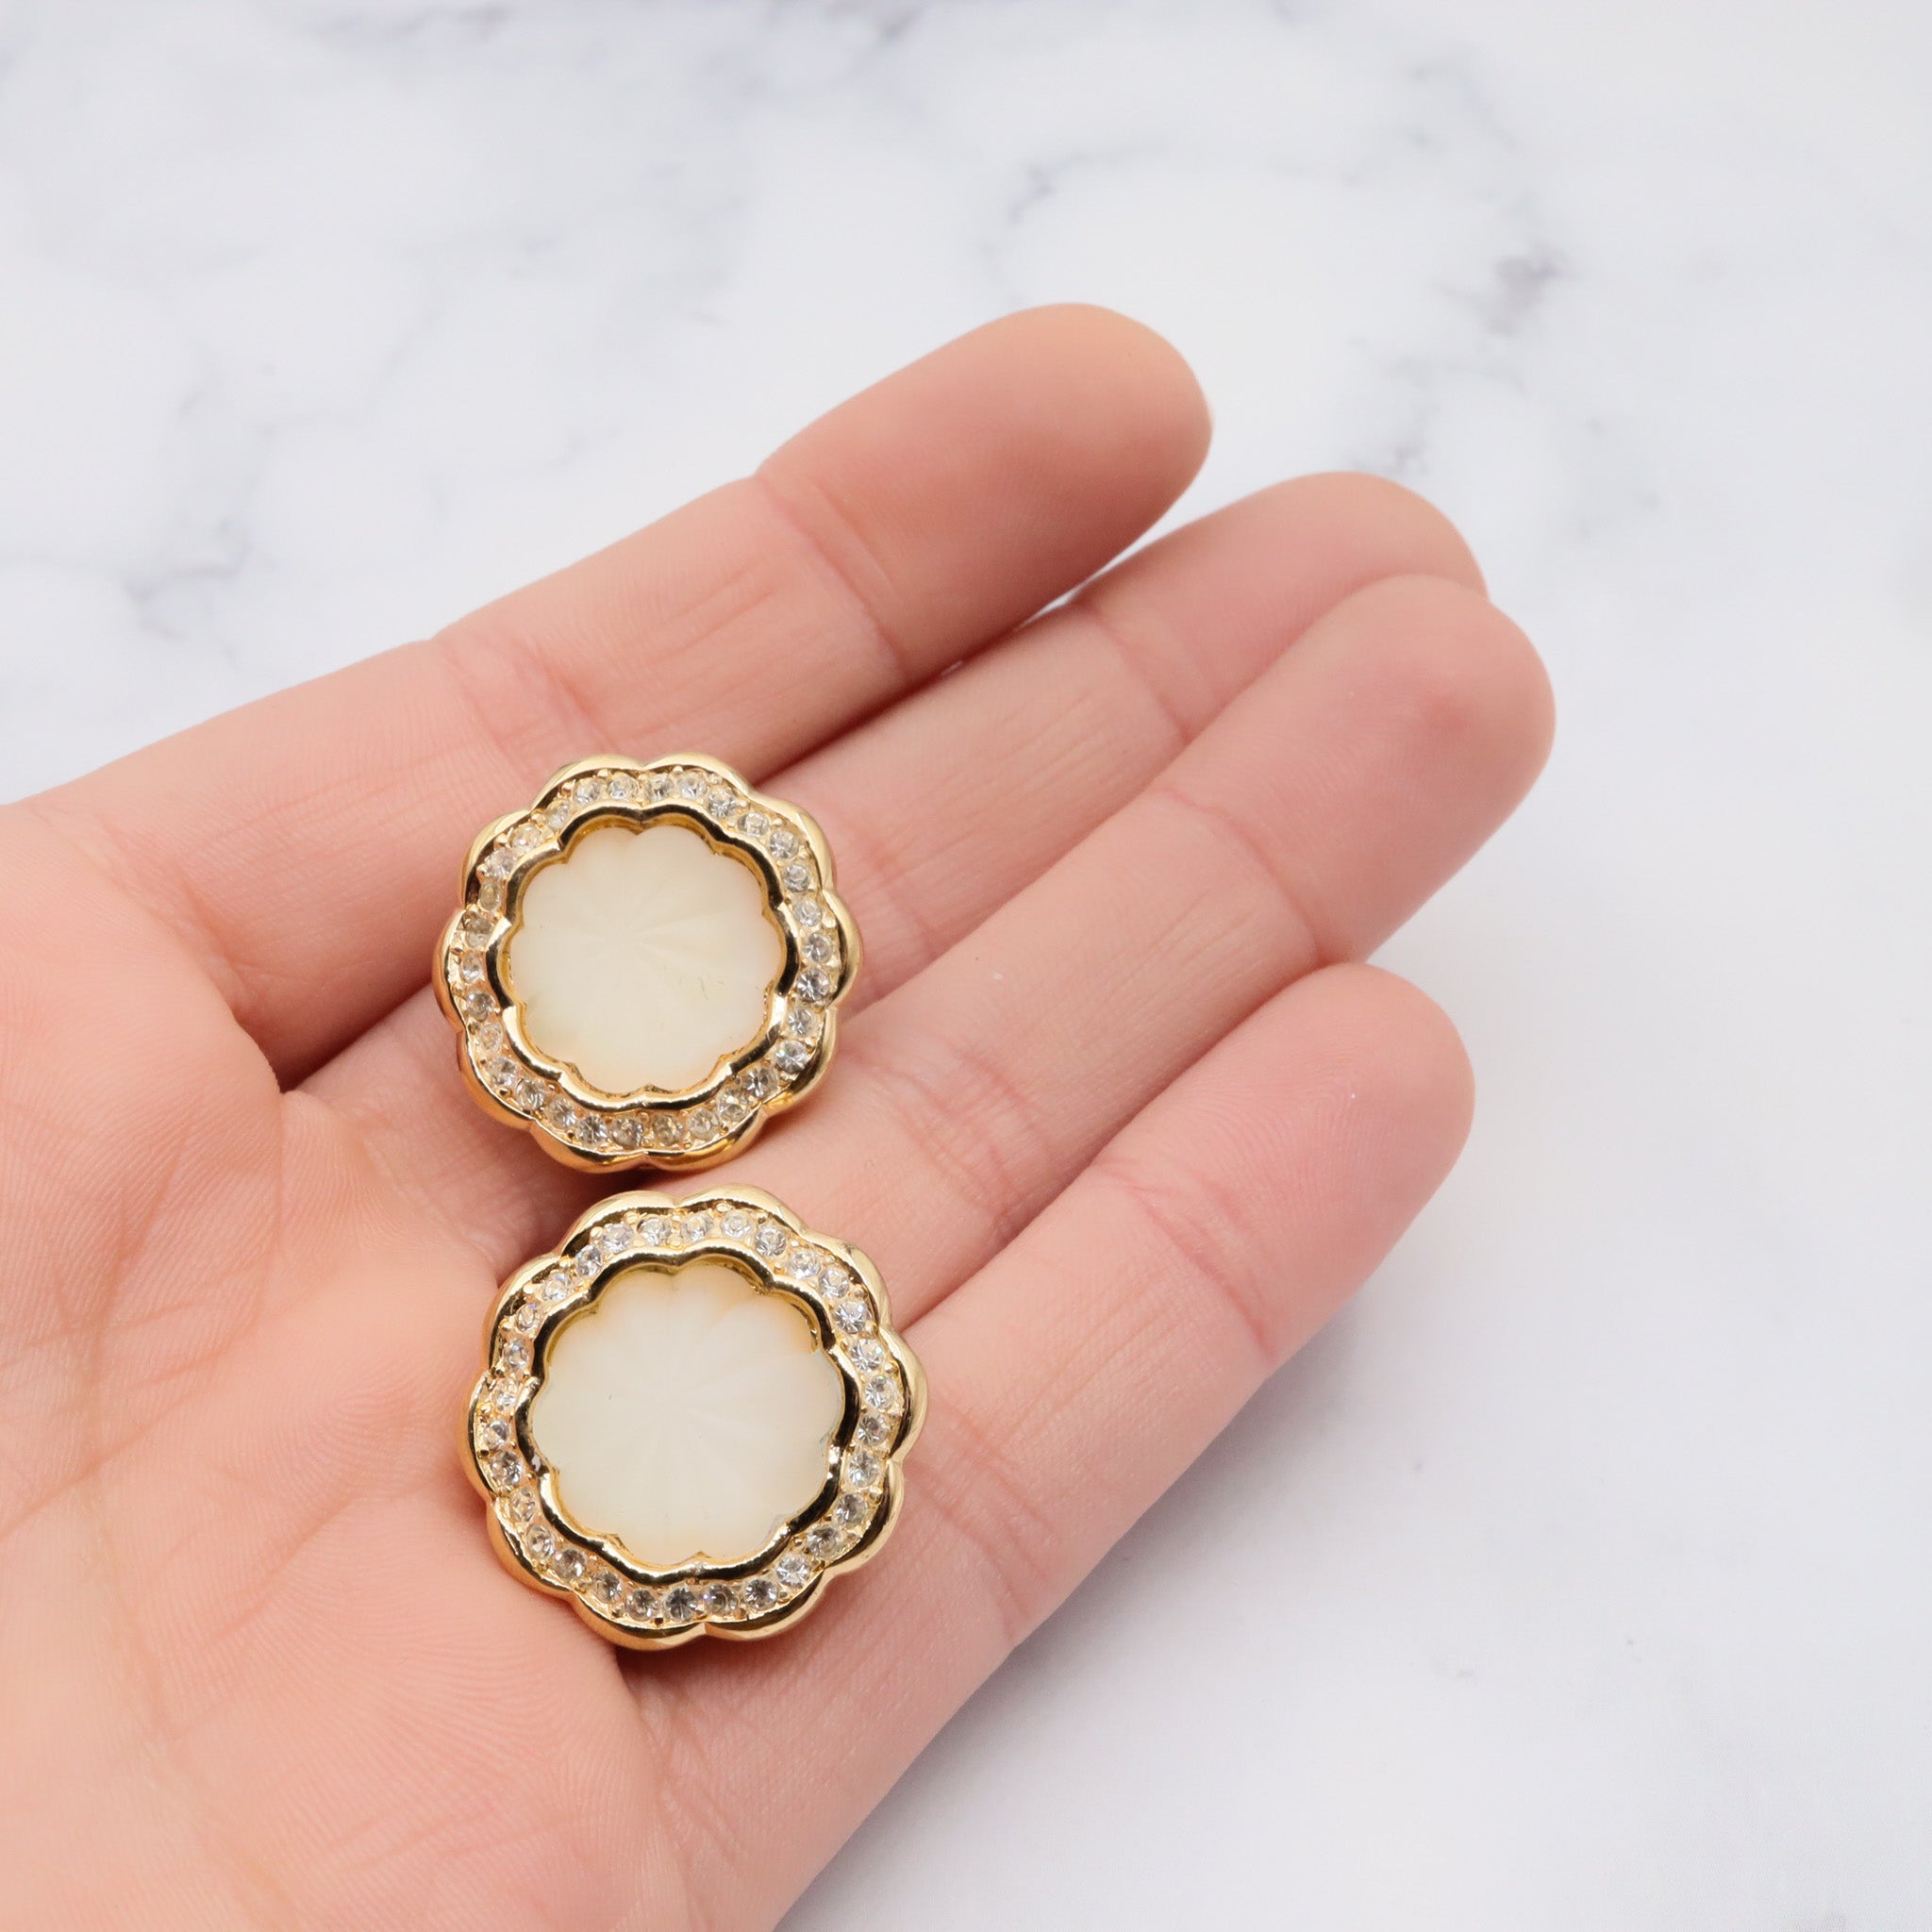 Christian Dior frosted carved glass and rhinestone gold tone clip on earrings